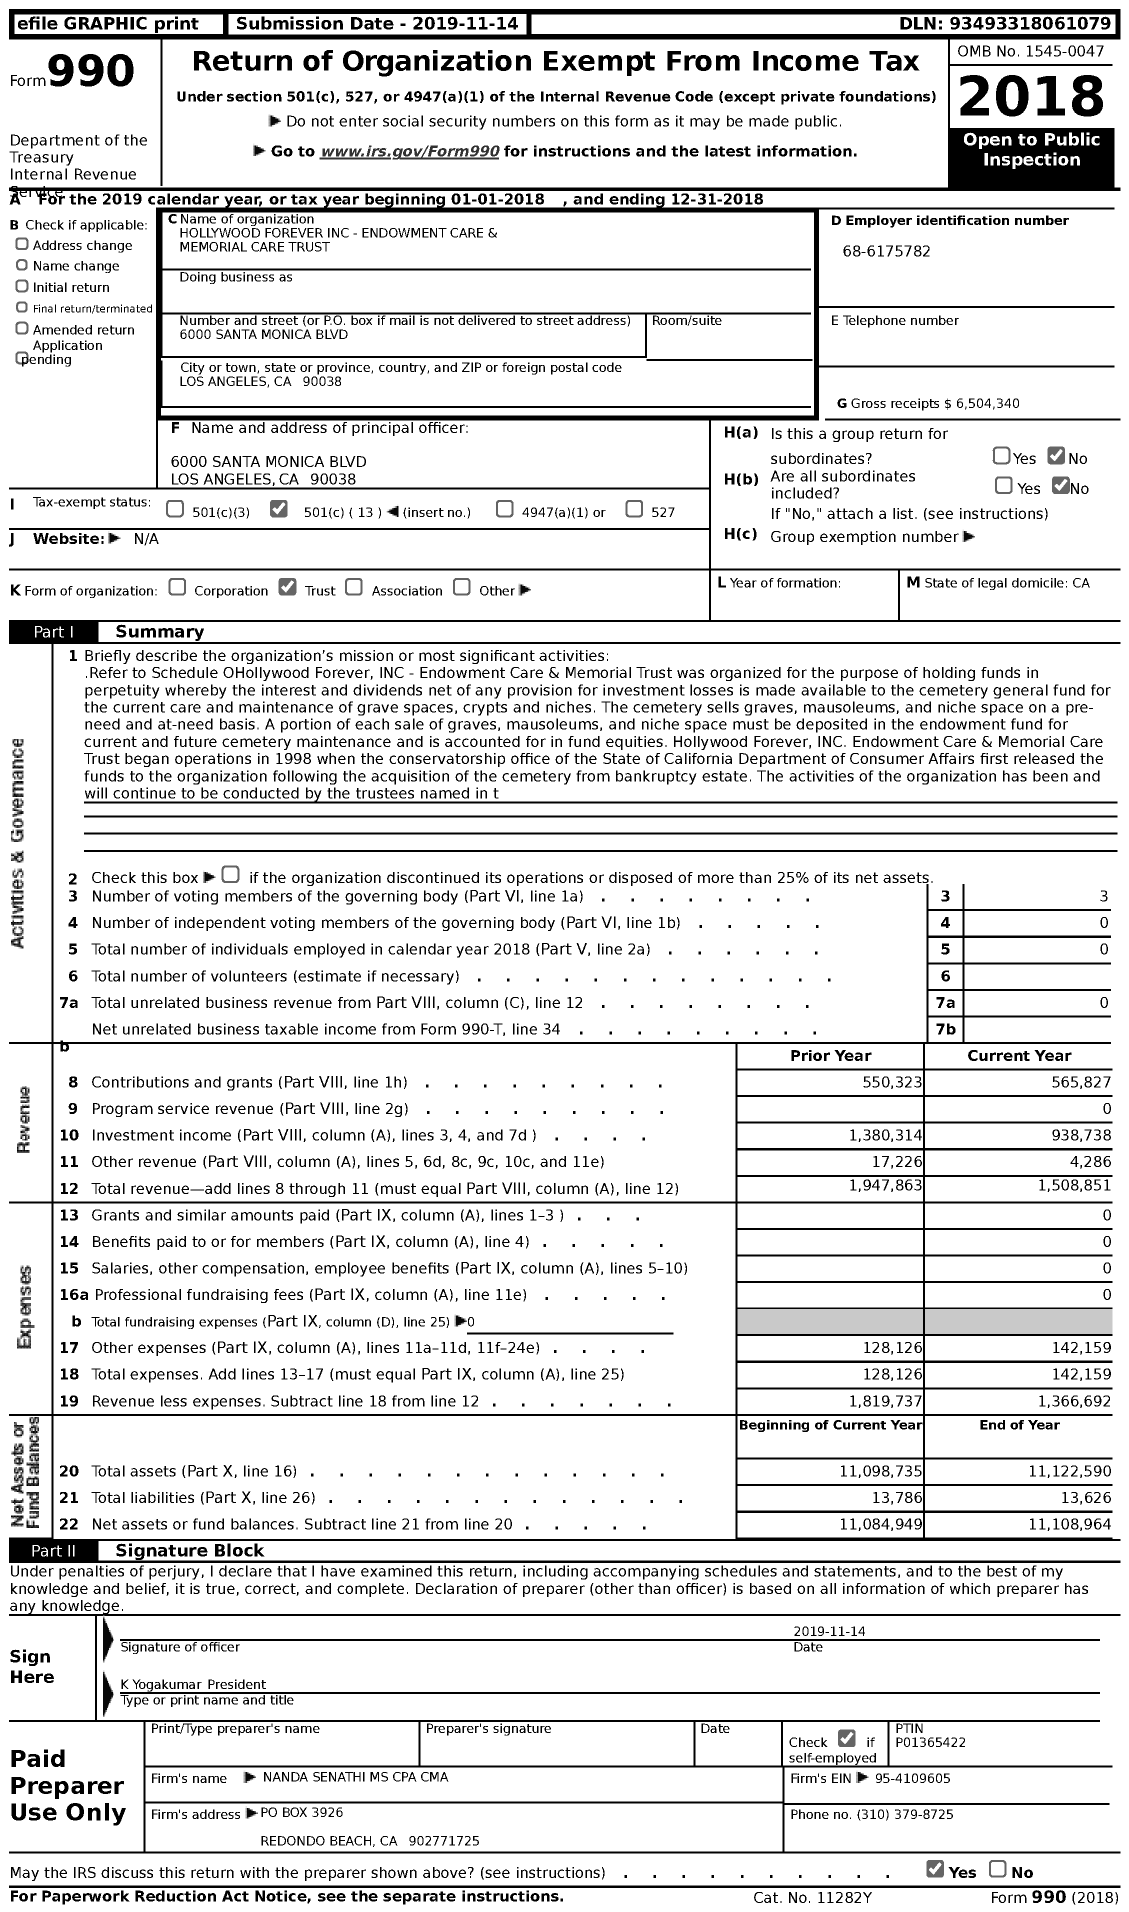 Image of first page of 2018 Form 990 for Hollywood Forever - Endowment Care and Memorial Care Trust